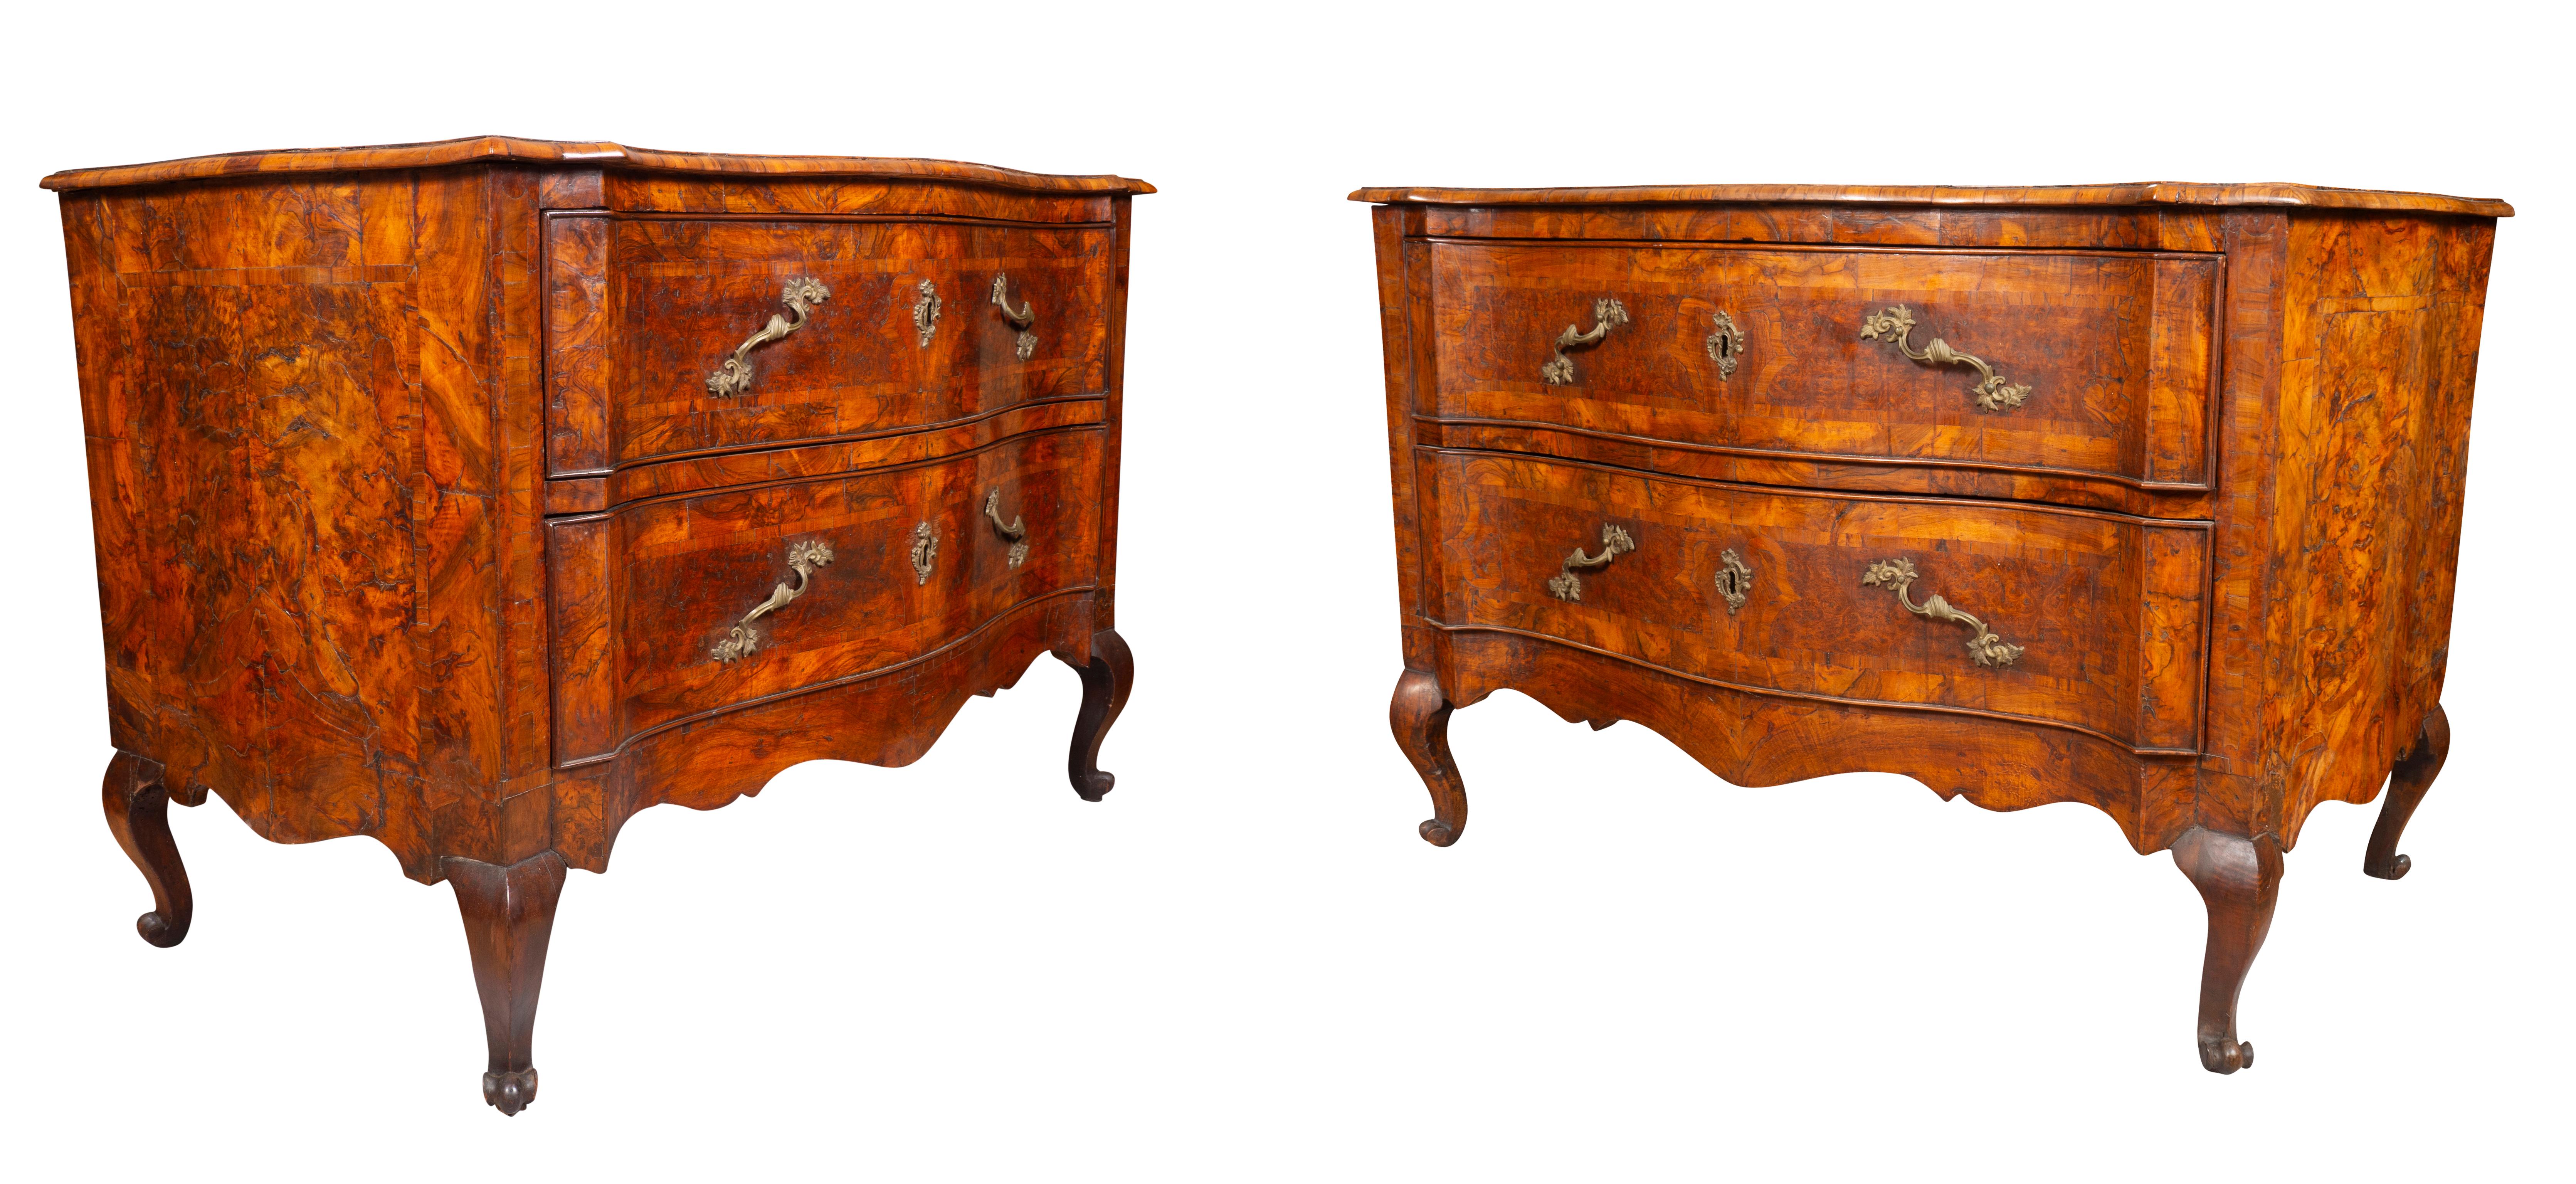 A fine pair of commodes in remarkably good condition. With serpentine rectangular top with book matched veneer over two conforming drawers with cast brass rocaille handles, raised on cabriole legs and scroll feet.